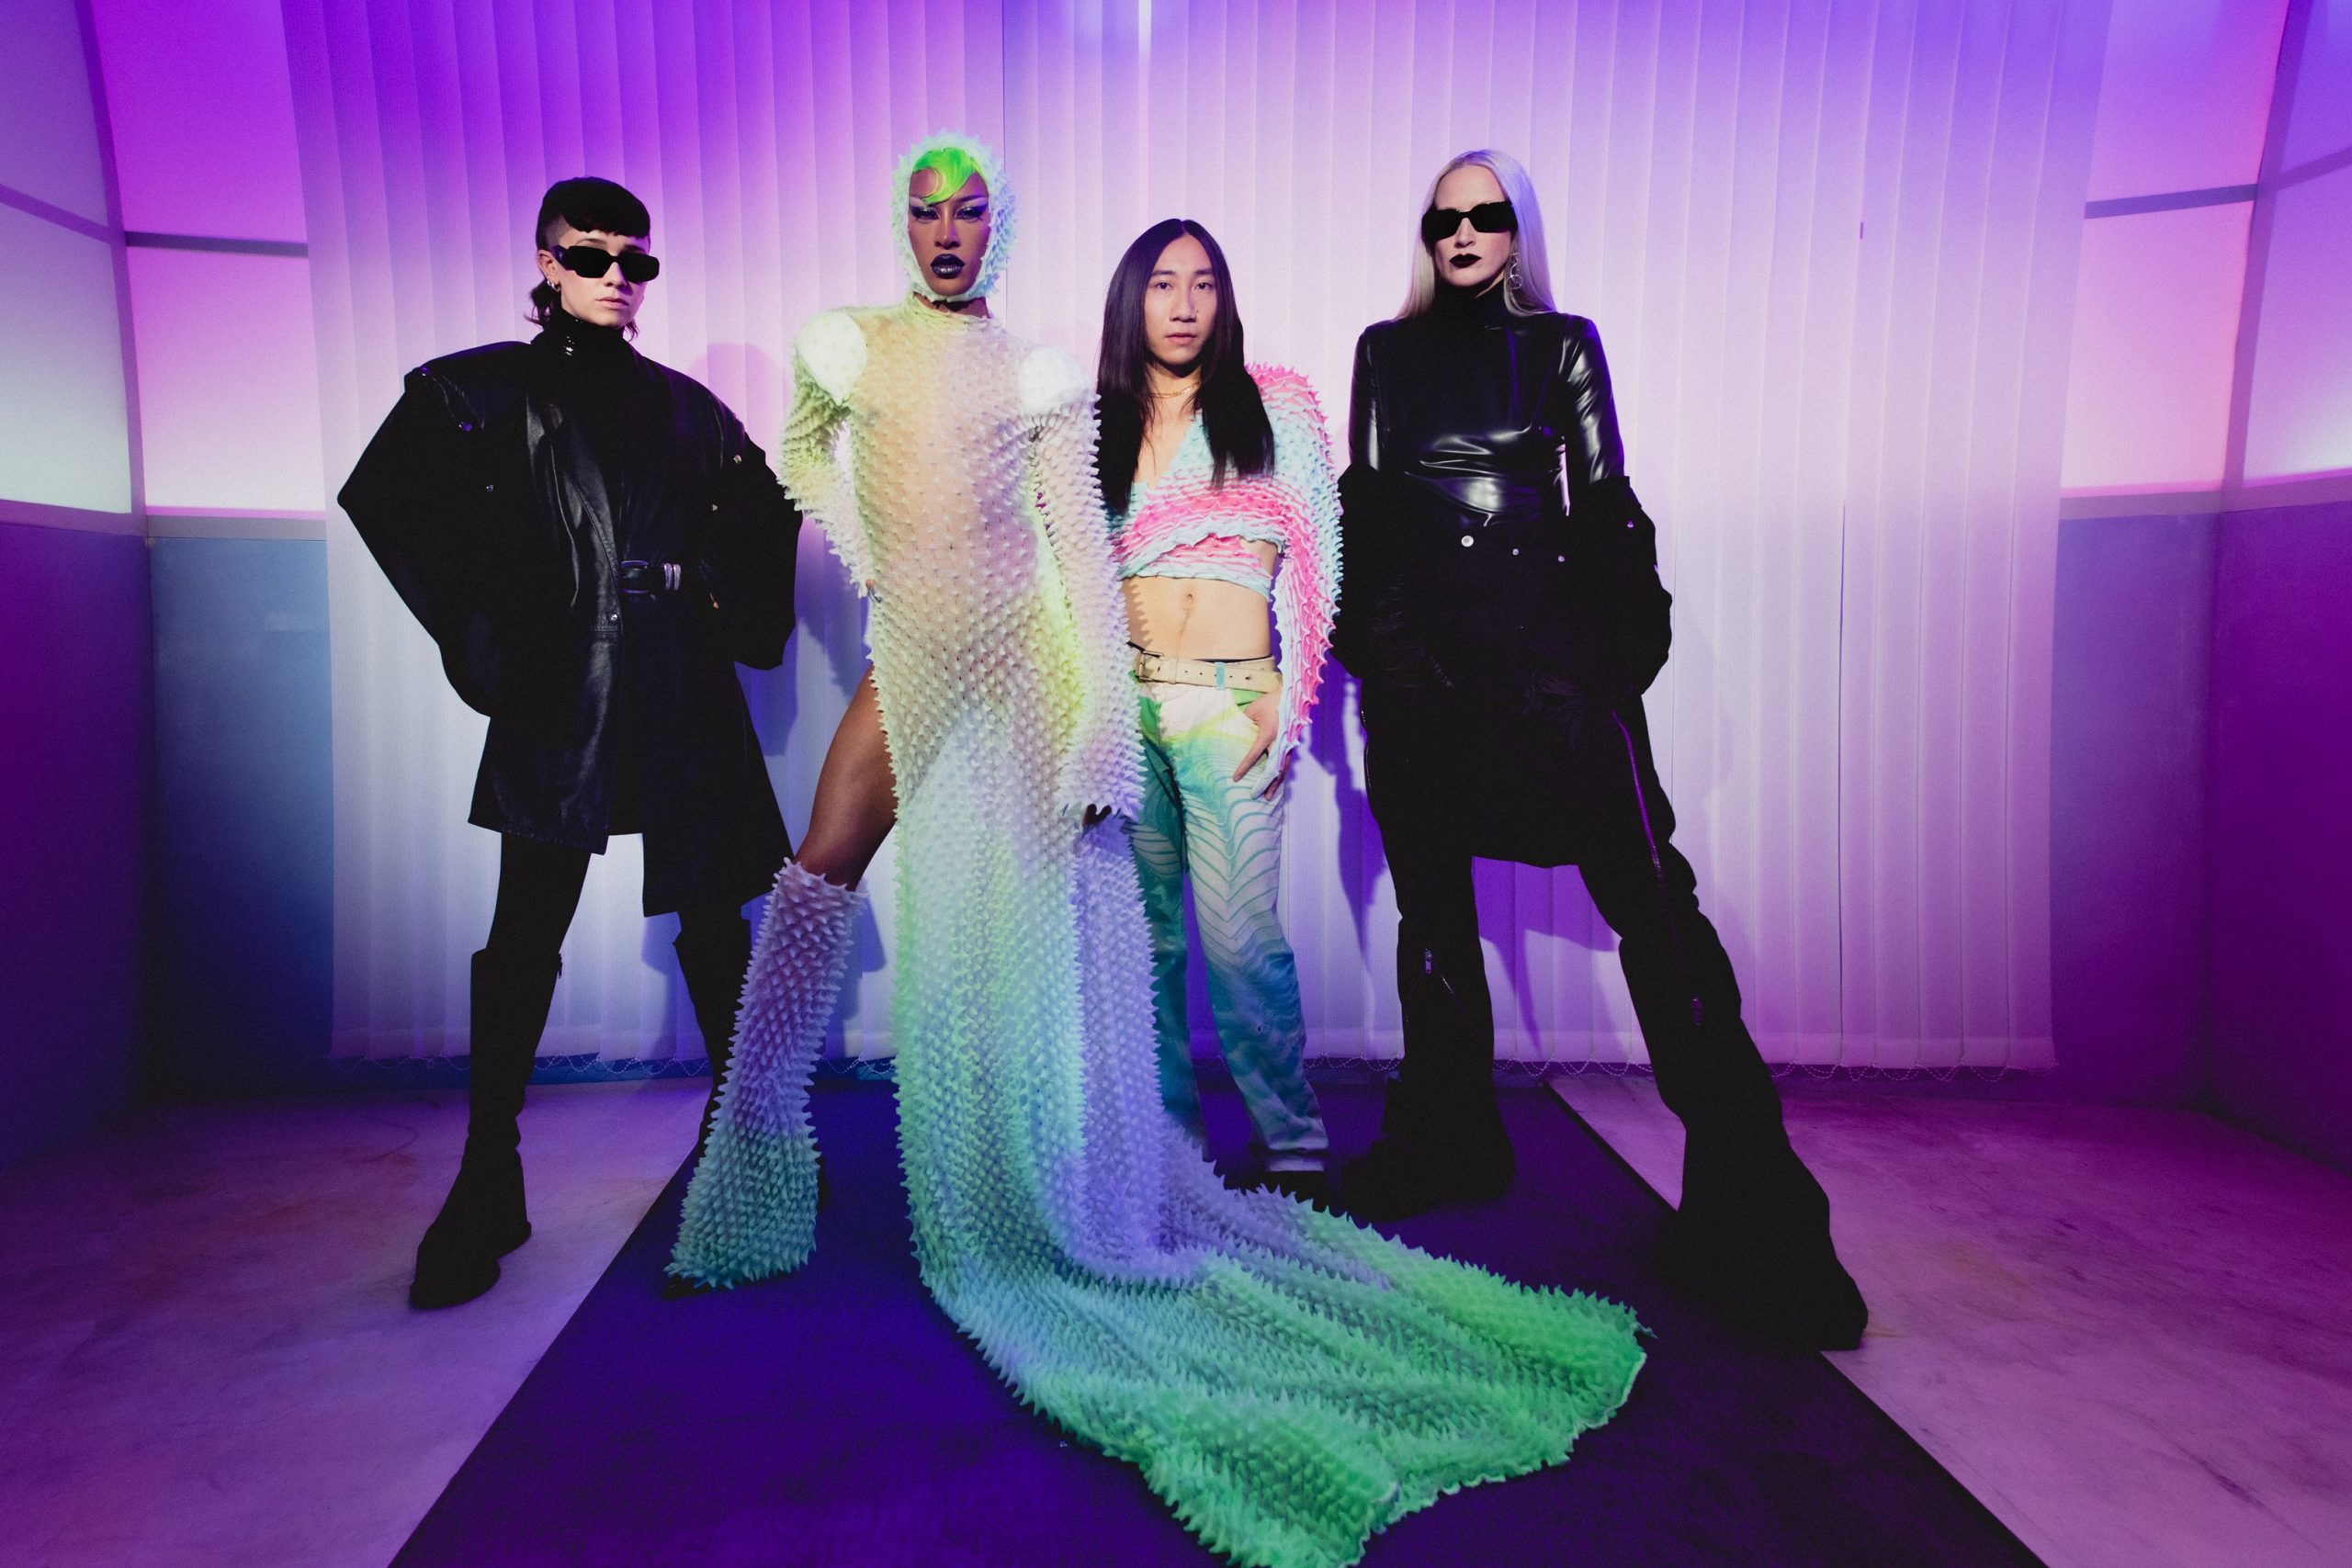 Fashion trio serve up first #BornToMix collaboration for Absolut